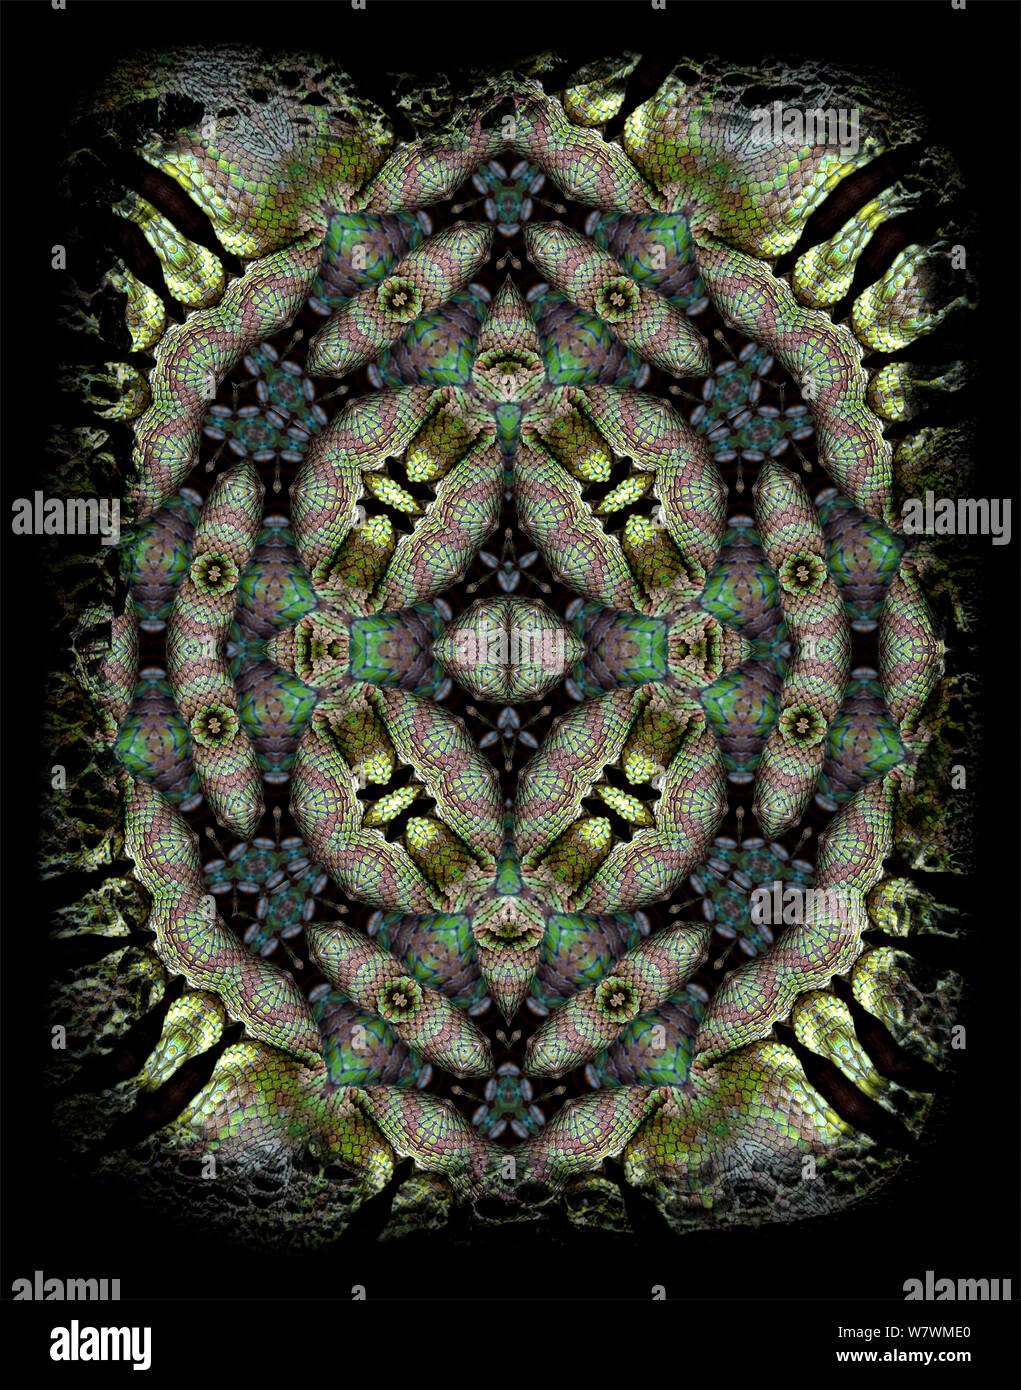 Kaleidoscope pattern formed from picture of Popes Tree Viper (Trimeresurus popeorum) scales. Restricted for Editorial use until December 2015 Stock Photo